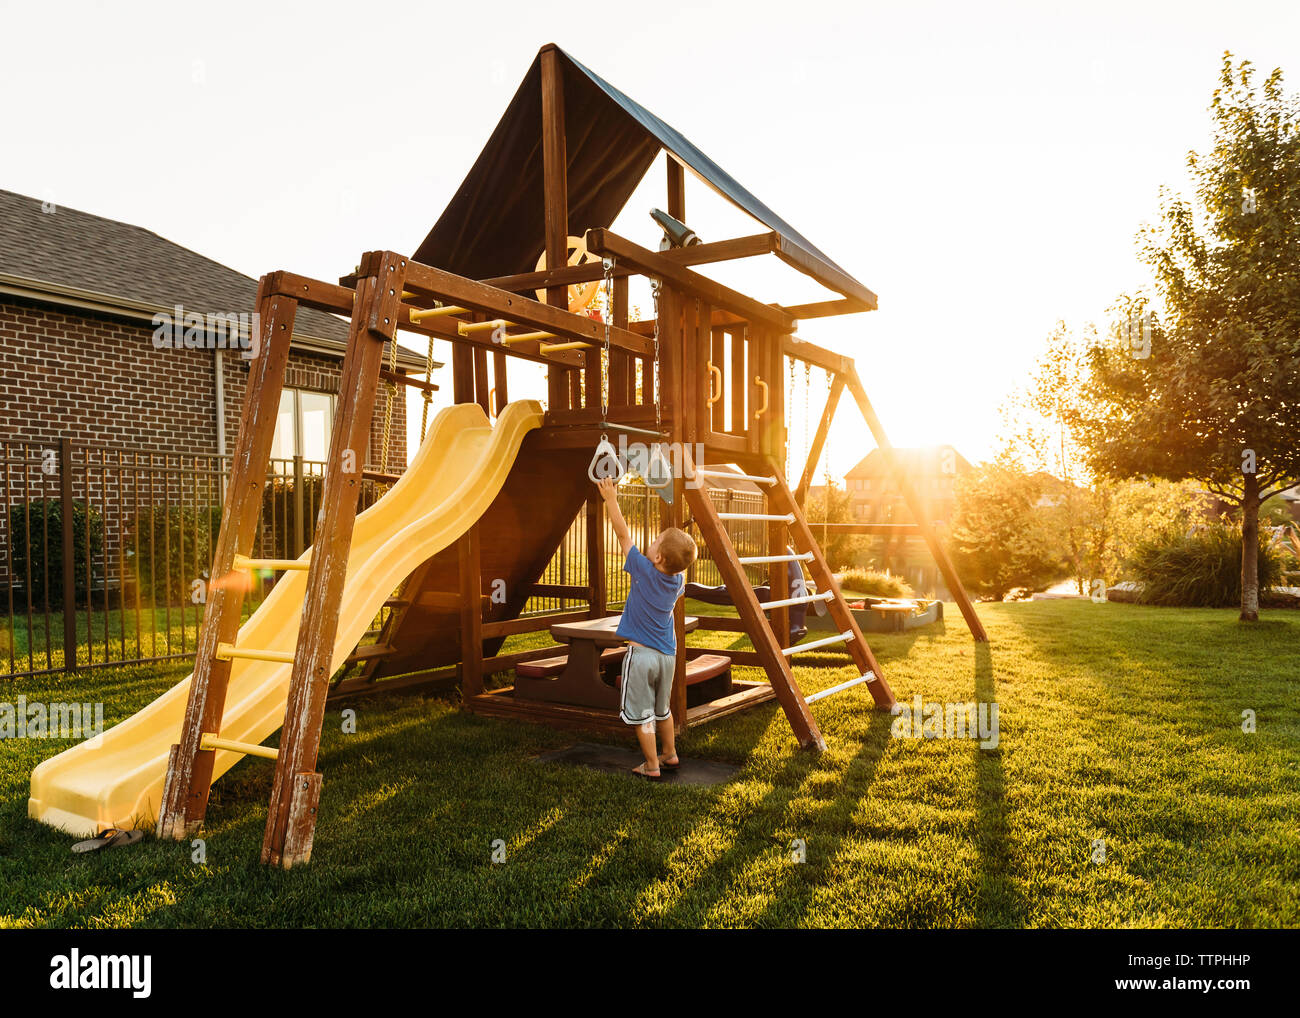 Boy playing with jungle gym in backyard during sunset Stock Photo